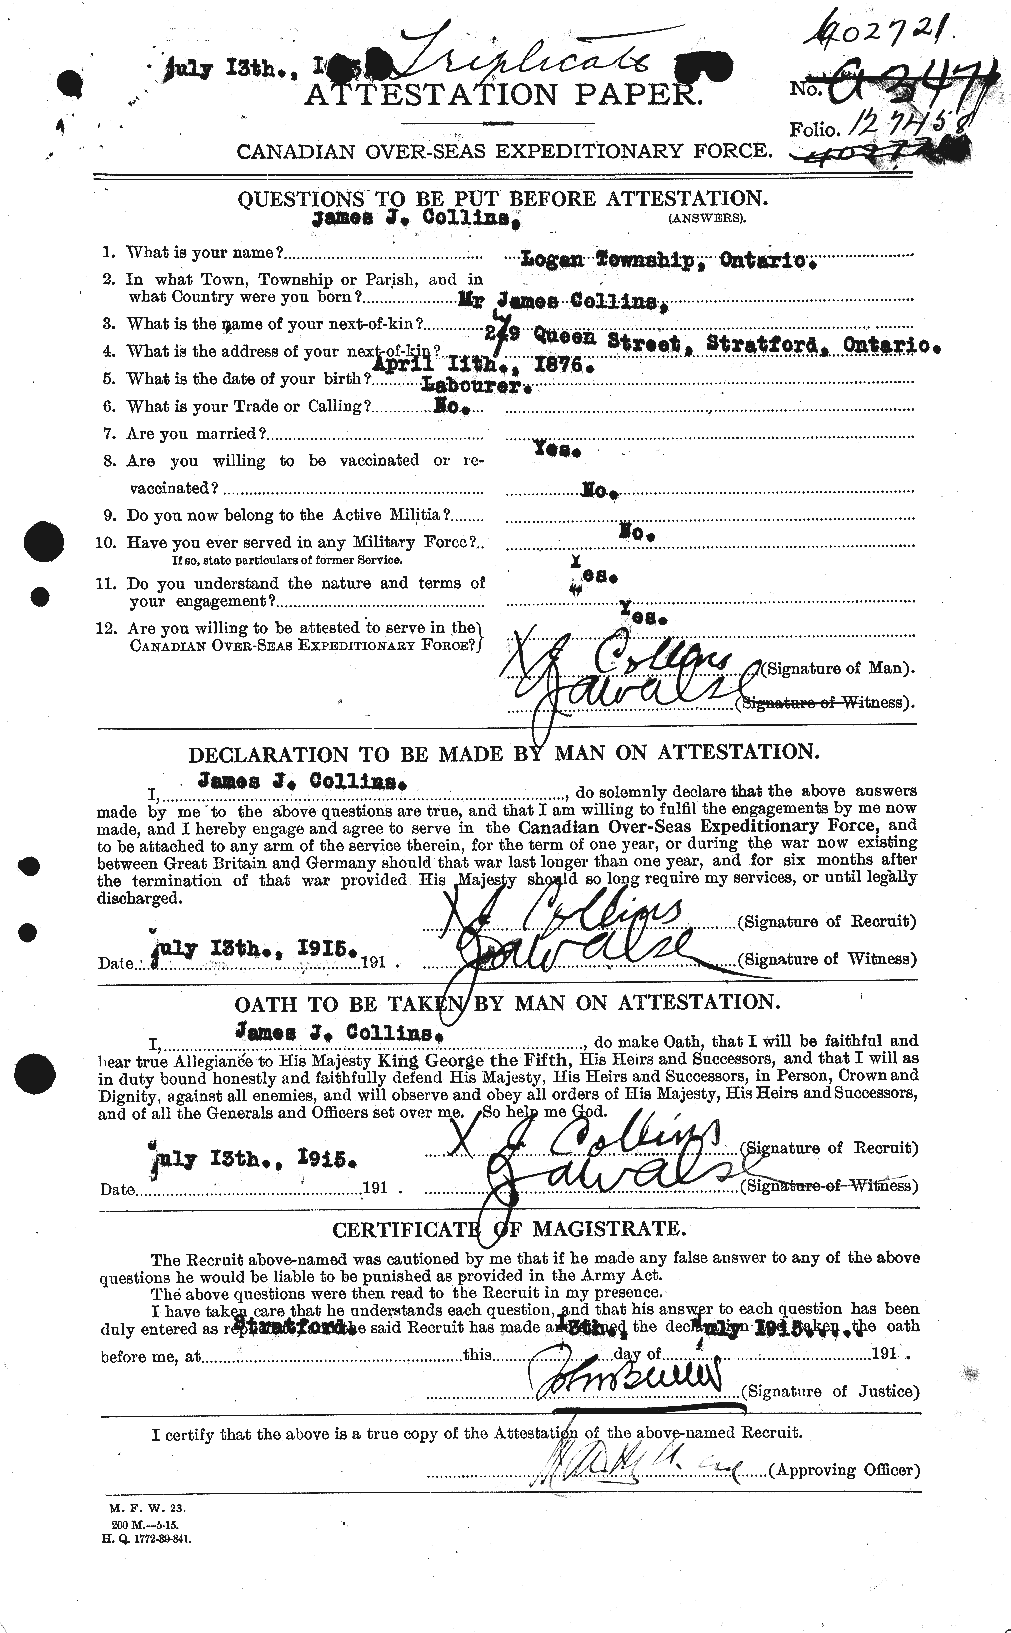 Personnel Records of the First World War - CEF 069948a